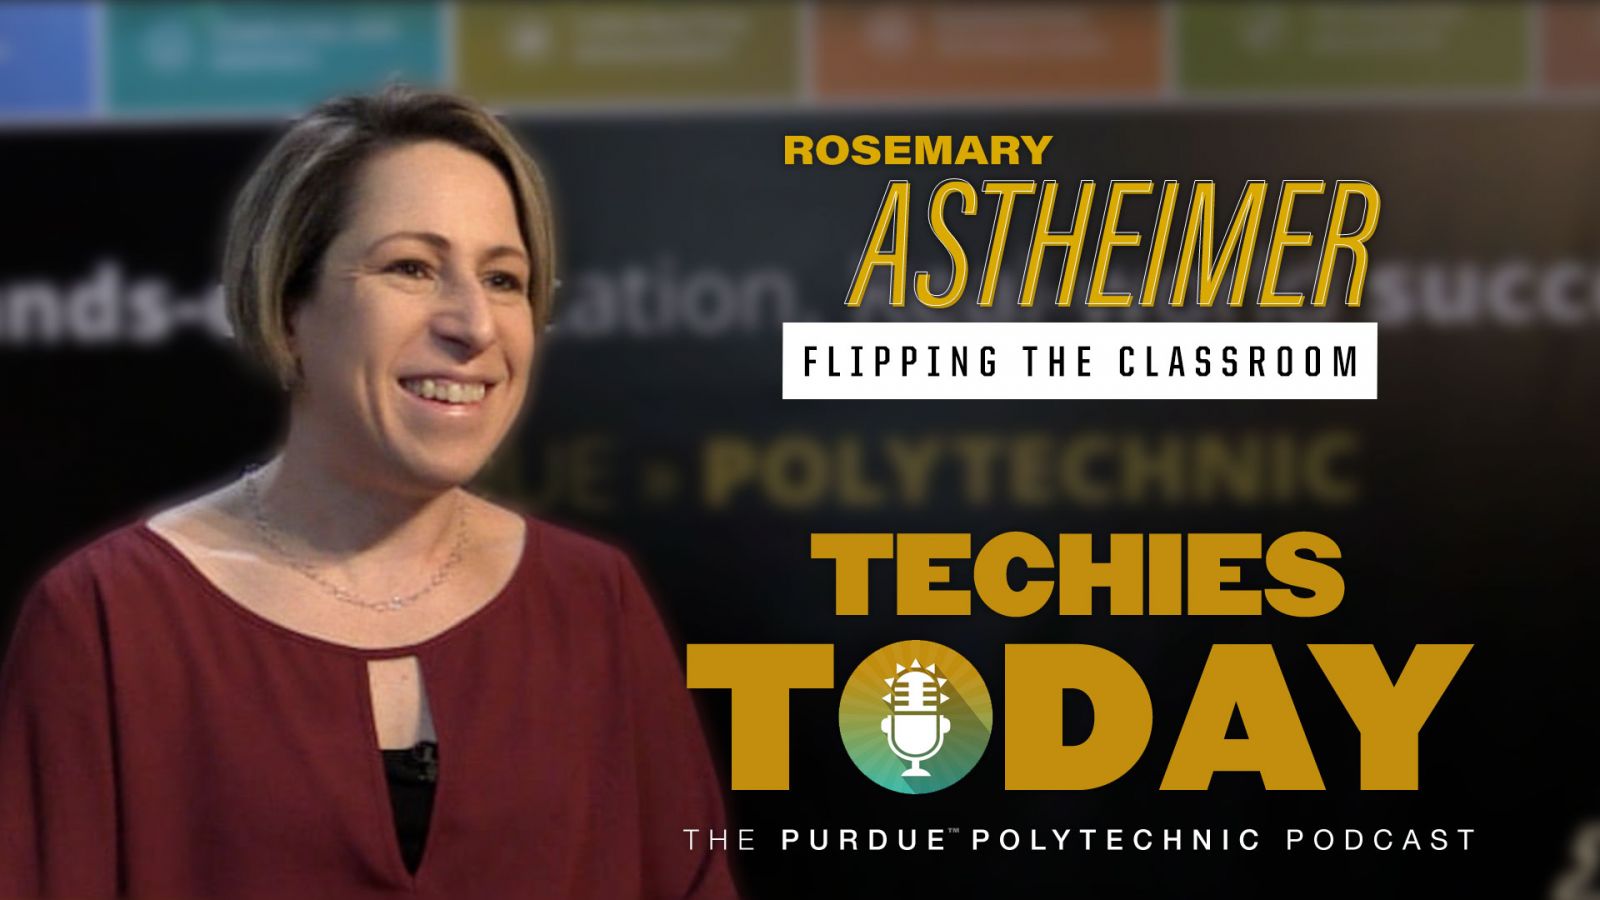 Rosemark Astheimer, Flipping the Classroom, on Techies Today, the Purdue Polytechnic Podcast